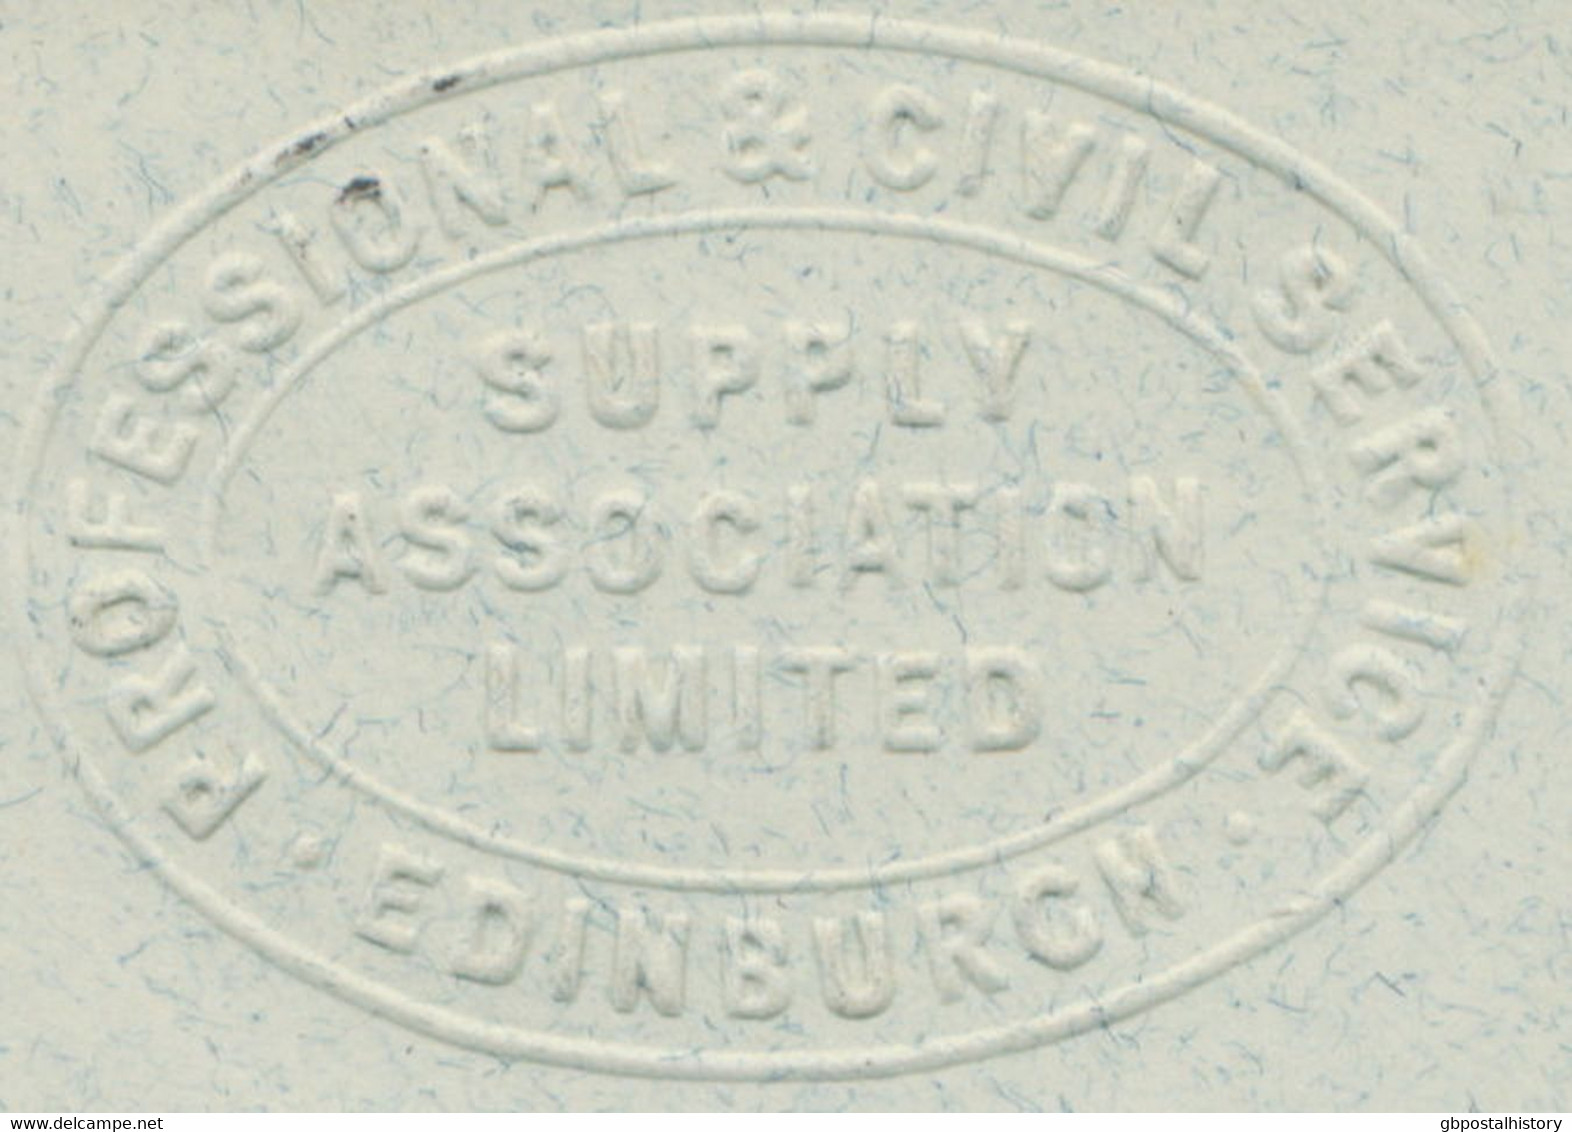 GB „EDINBURGH / 32“ Double Cirlce (29mm) Fine/very Fine QV ½d Embossed Stamped To Order Postal Stationery Envelope 1898 - Scotland